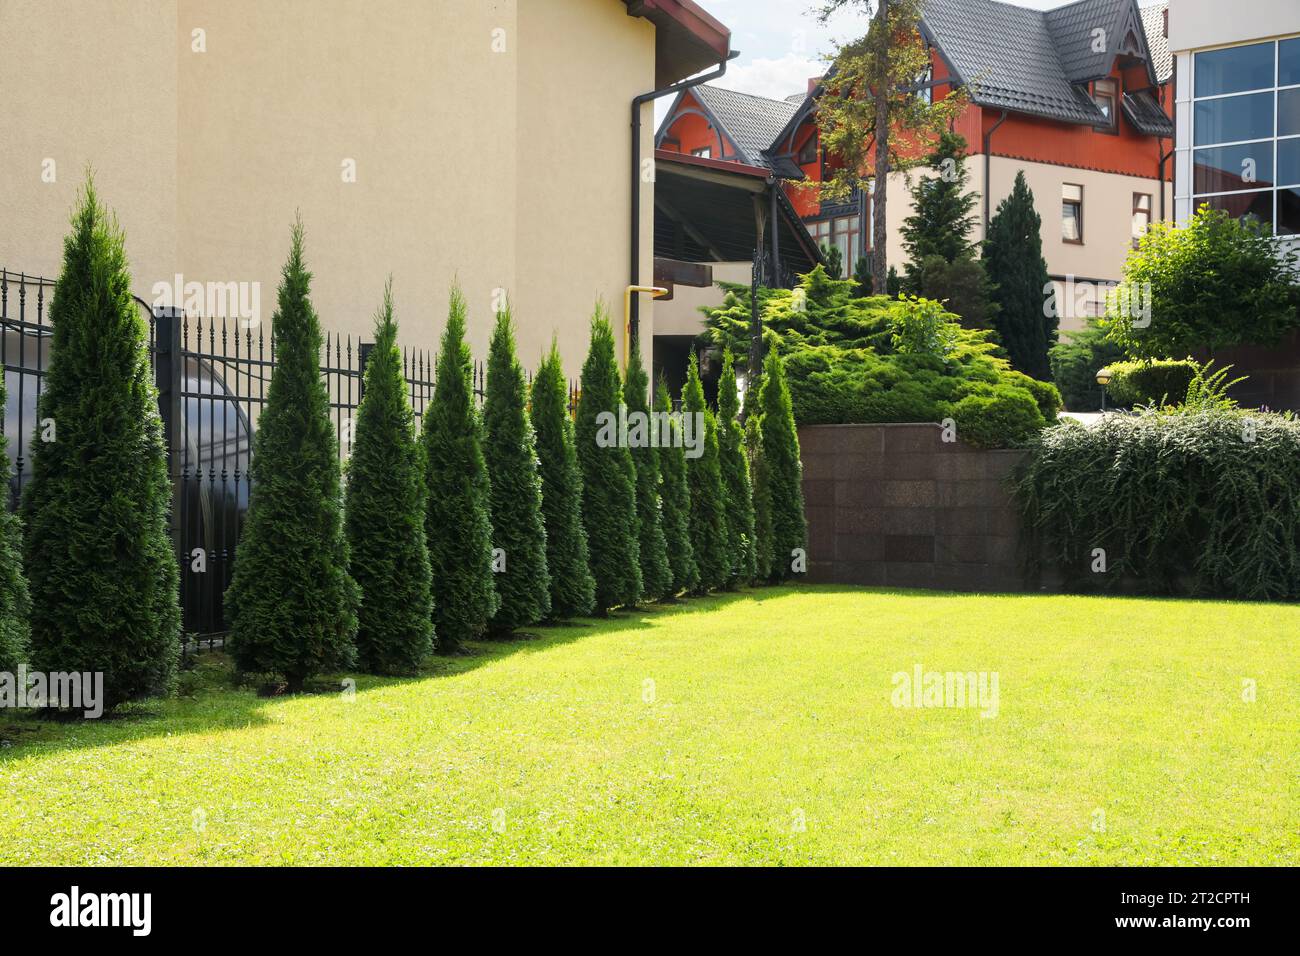 Beautiful thuja trees and green lawn outdoors. Gardening and landscaping Stock Photo